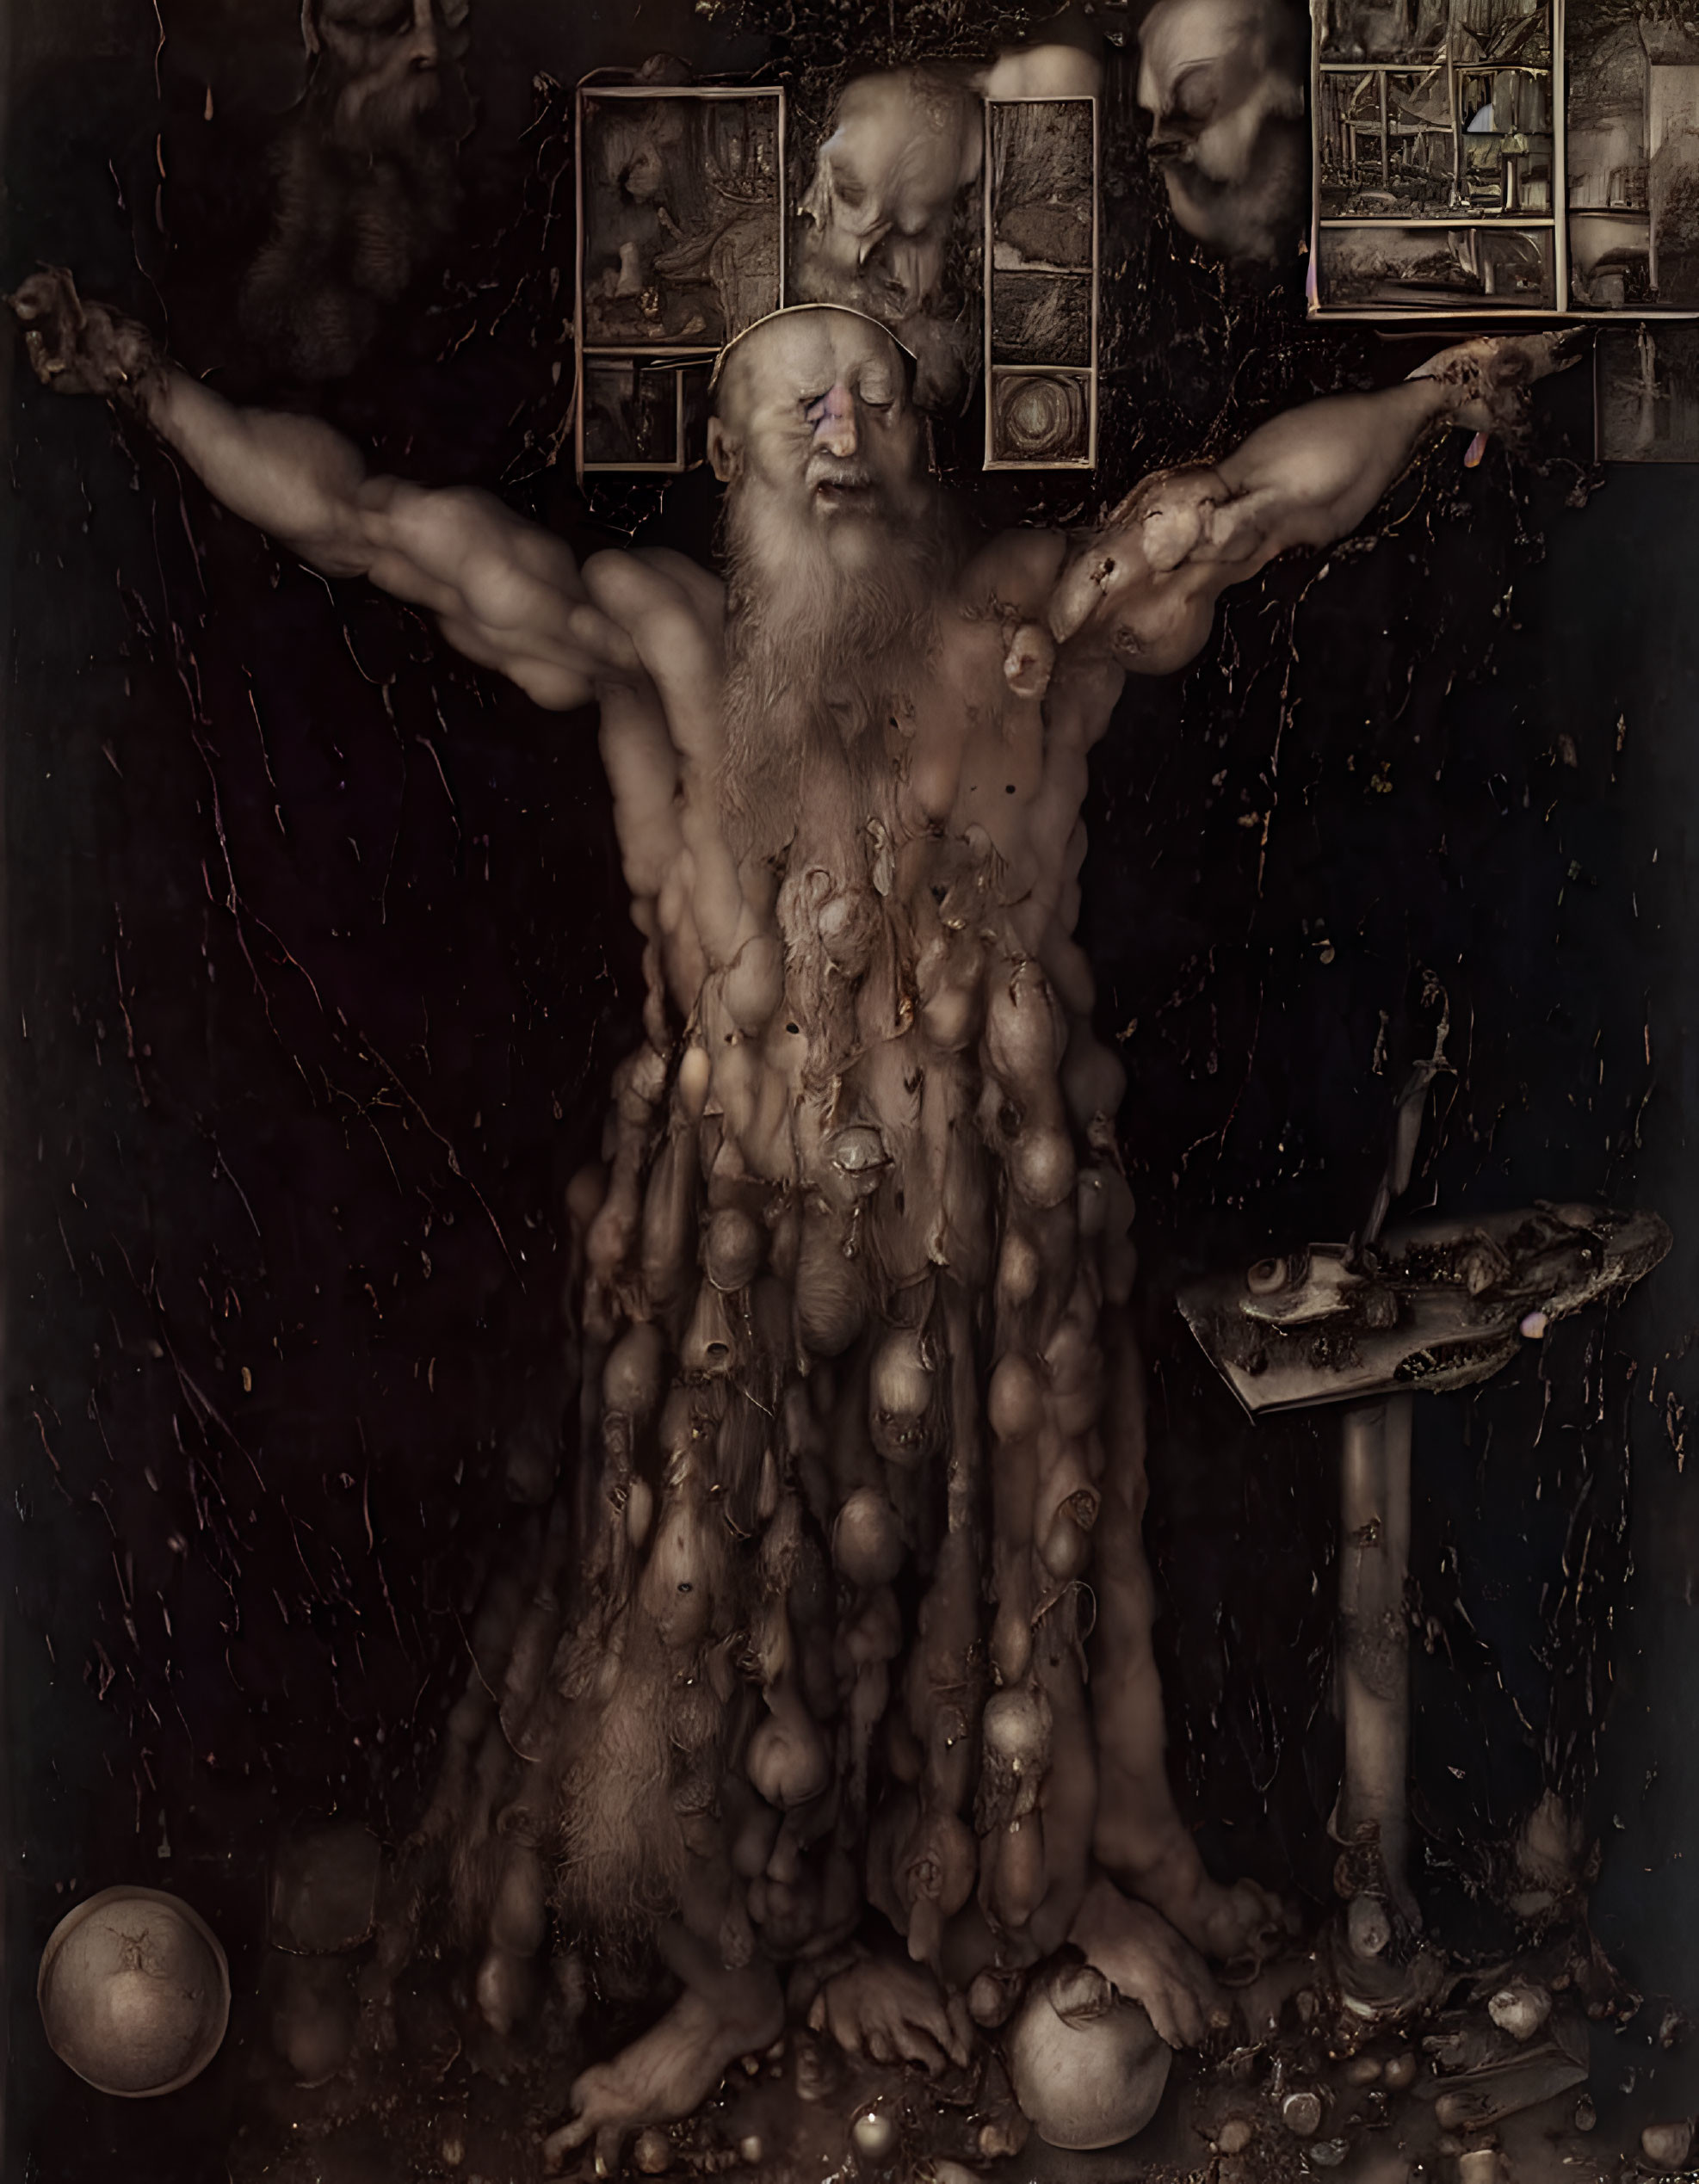 Elderly bearded figure with outstretched arms in surreal dark setting